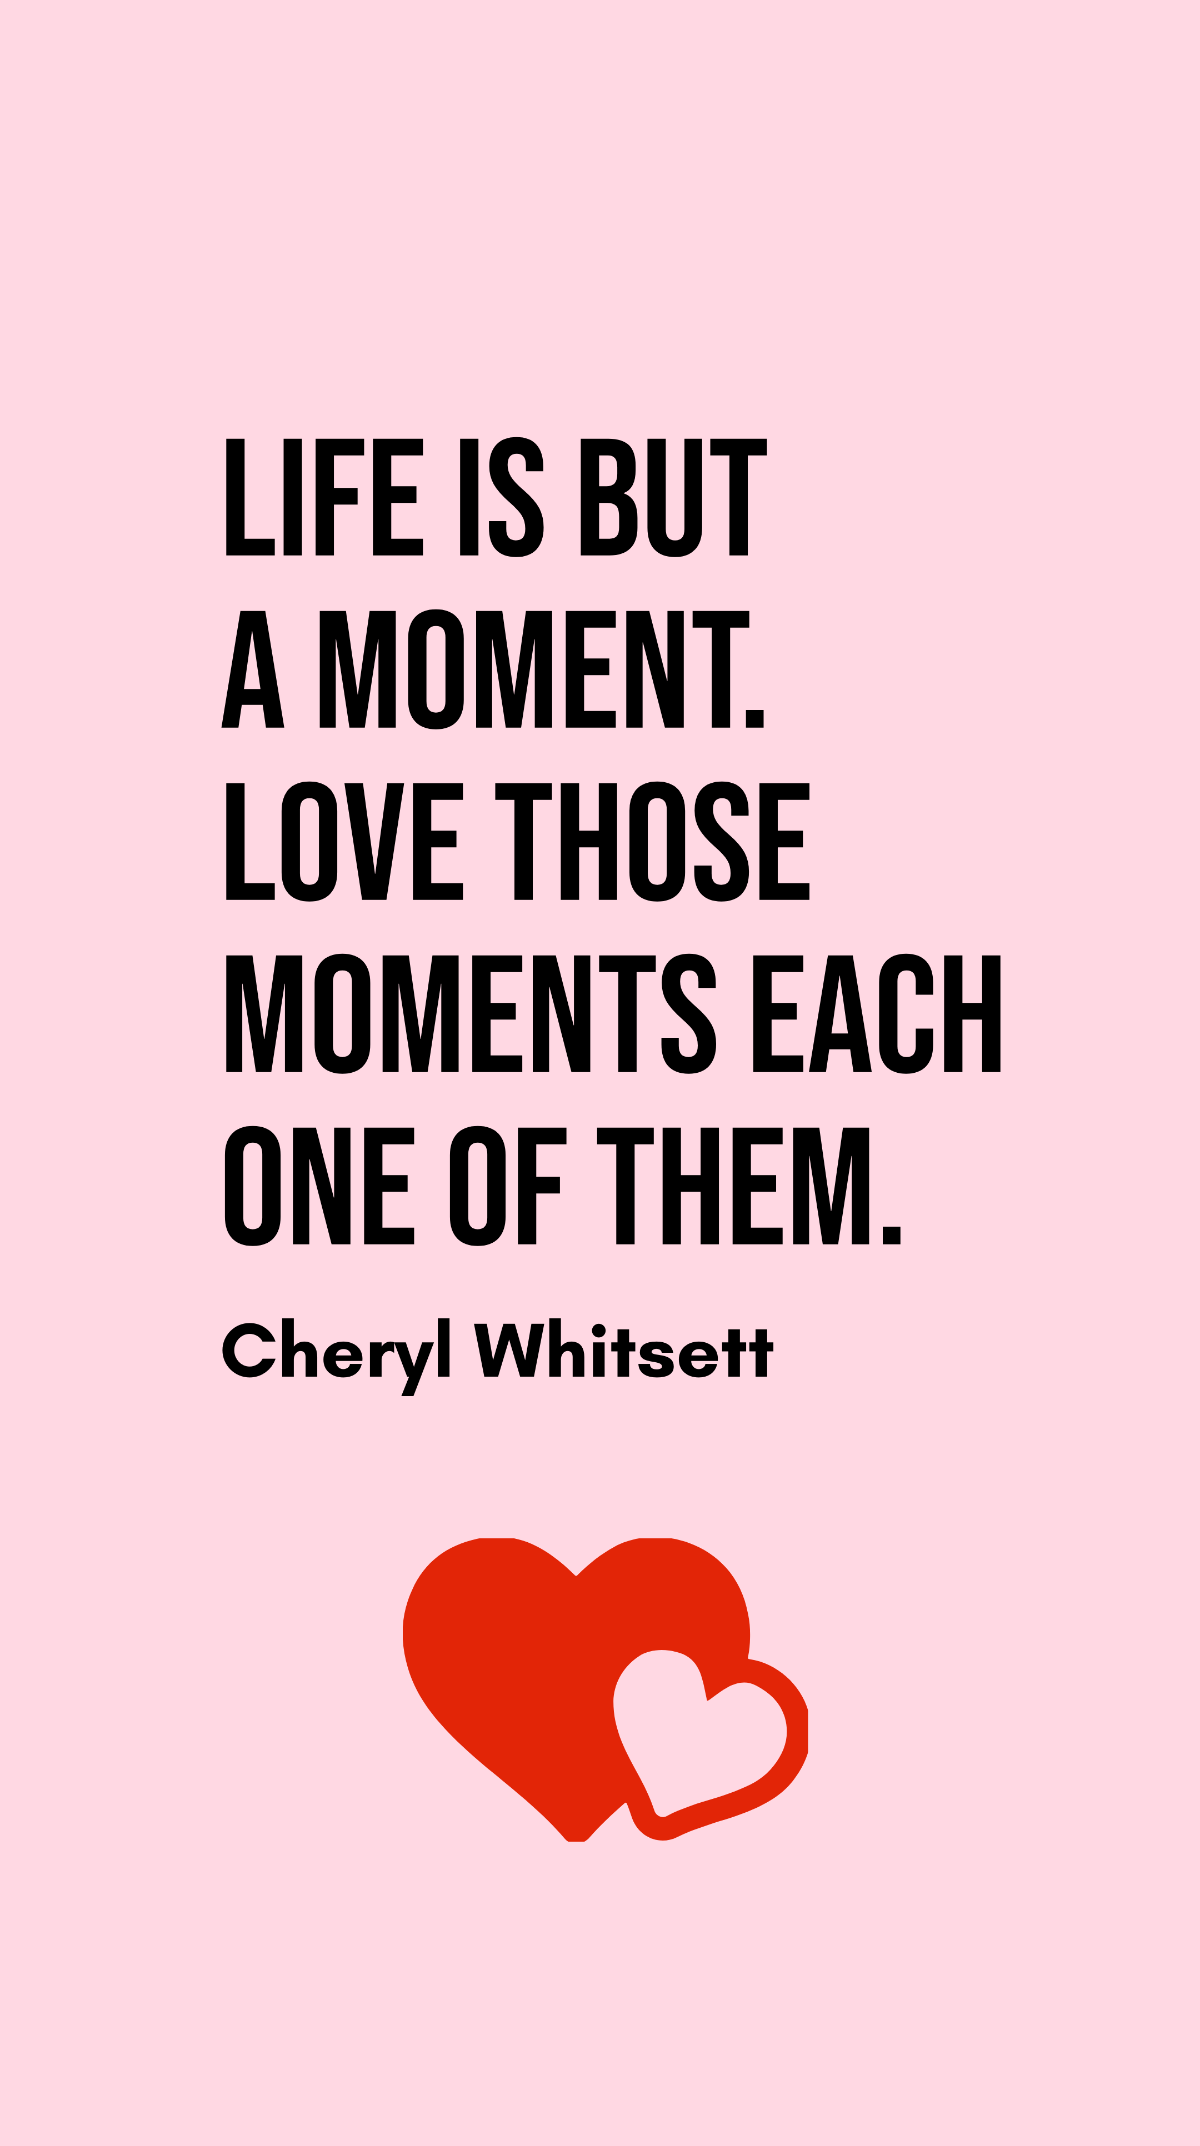 Cheryl Whitsett - Life is but a moment. Love those moments each one of them. Template